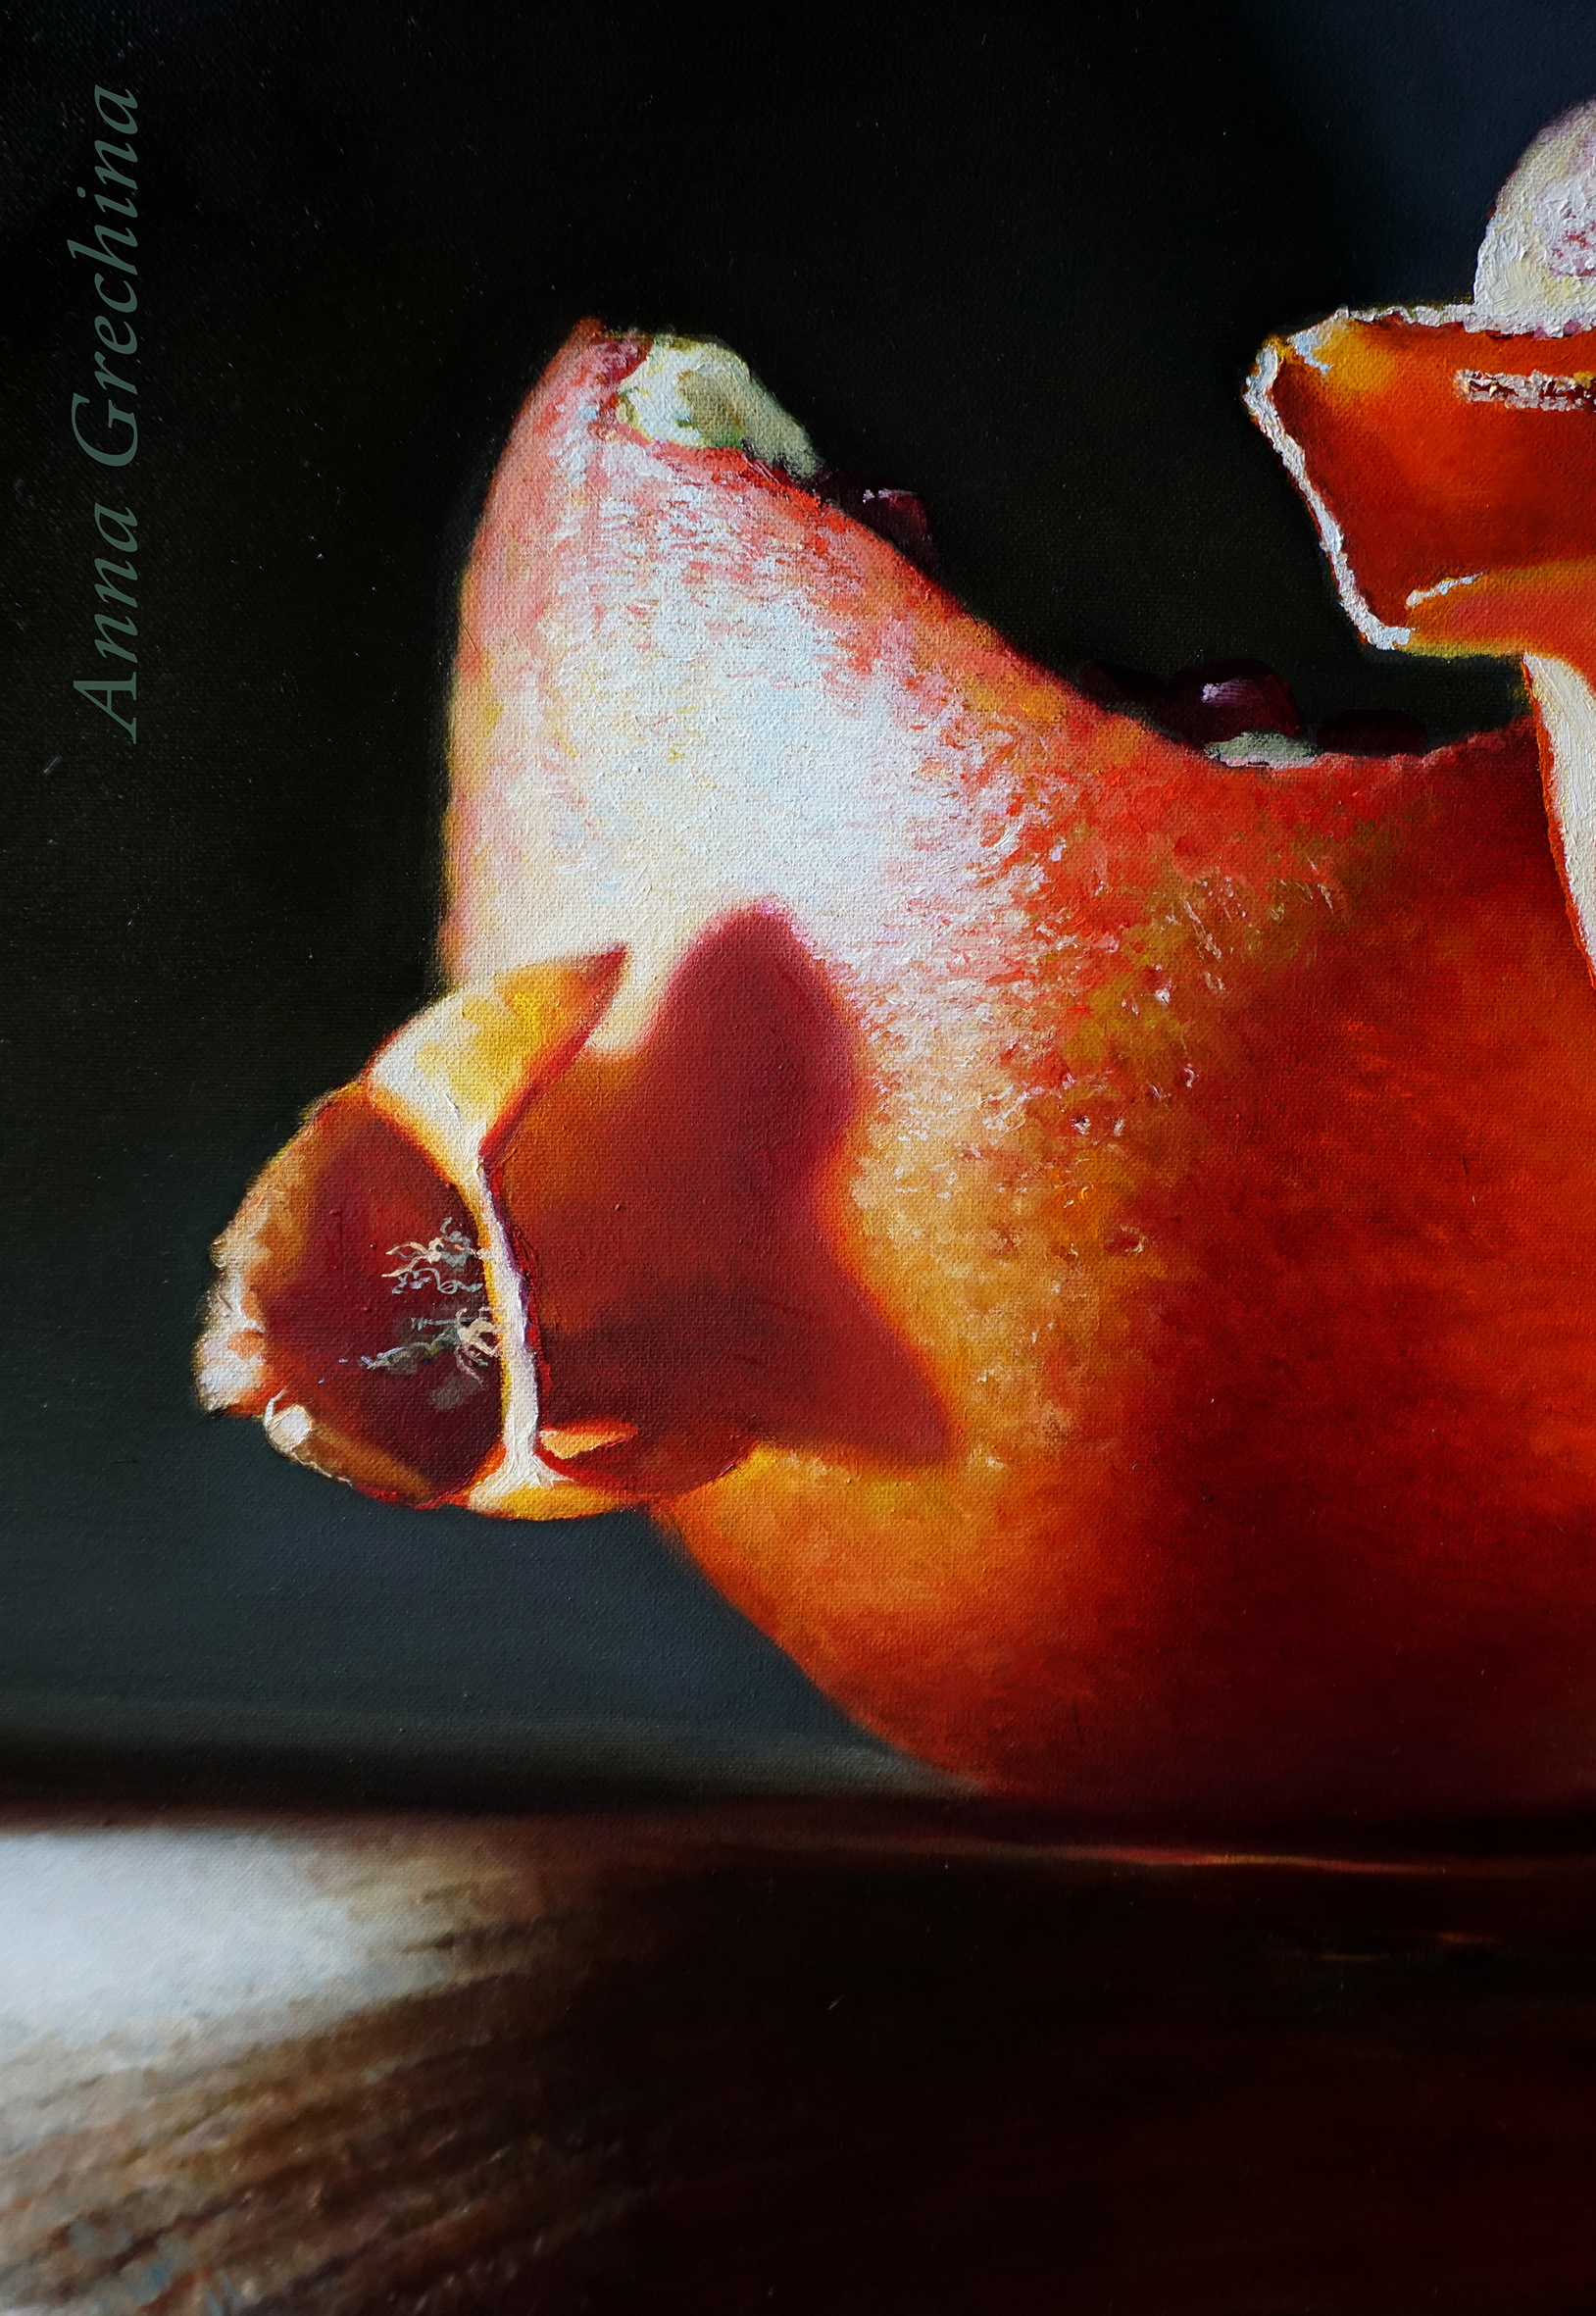 Grechina Anna paintings, painting. hyperrealism. Still life with pomegranate.